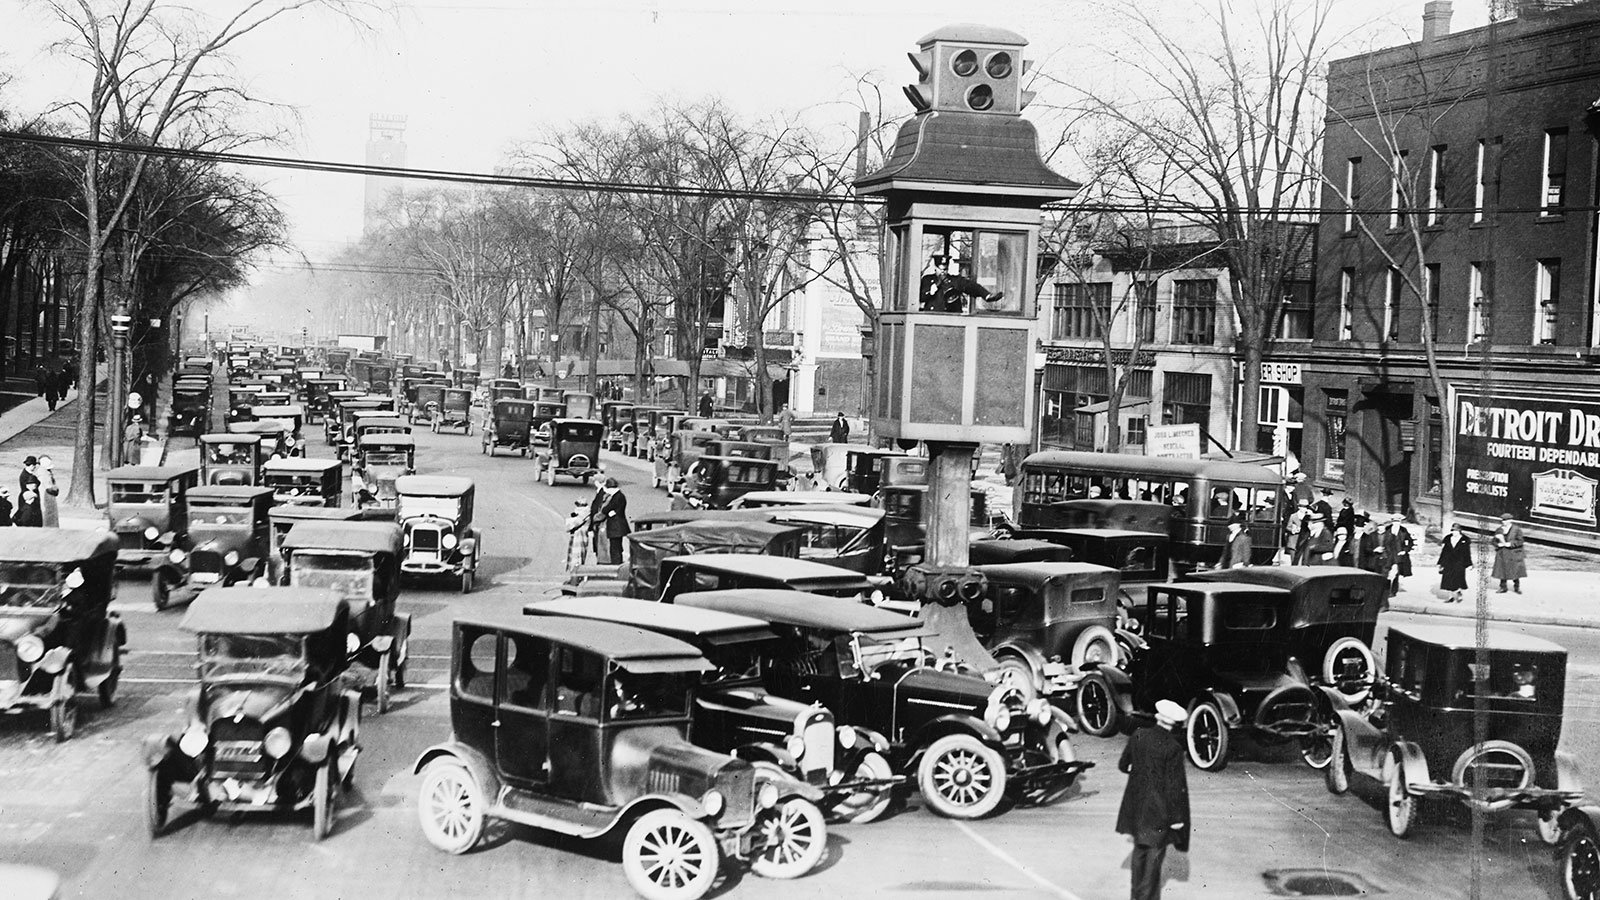 Traffic in Detroit, Michigan between 1915 and 1925